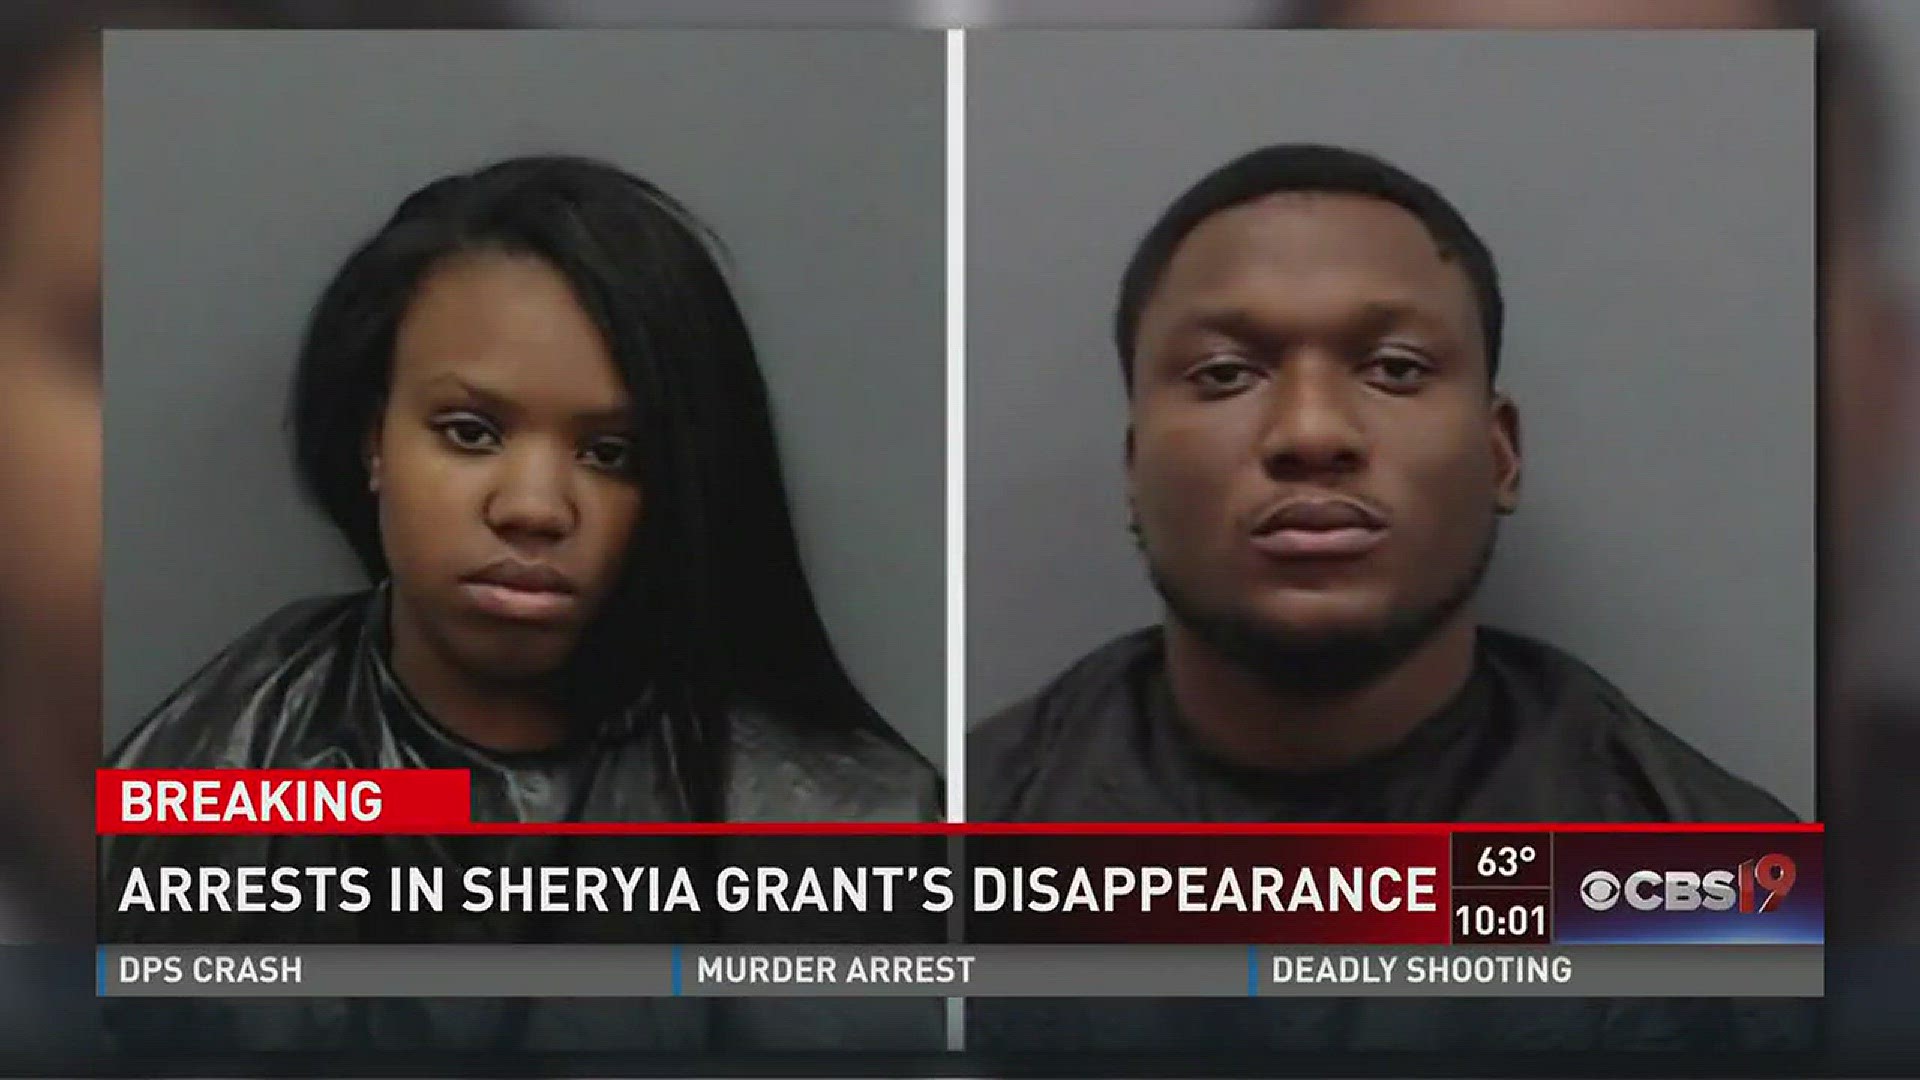 Two Overton Residents are in jail, who police believe are responsible to the disappearance of 20 year old Sheryia Grant